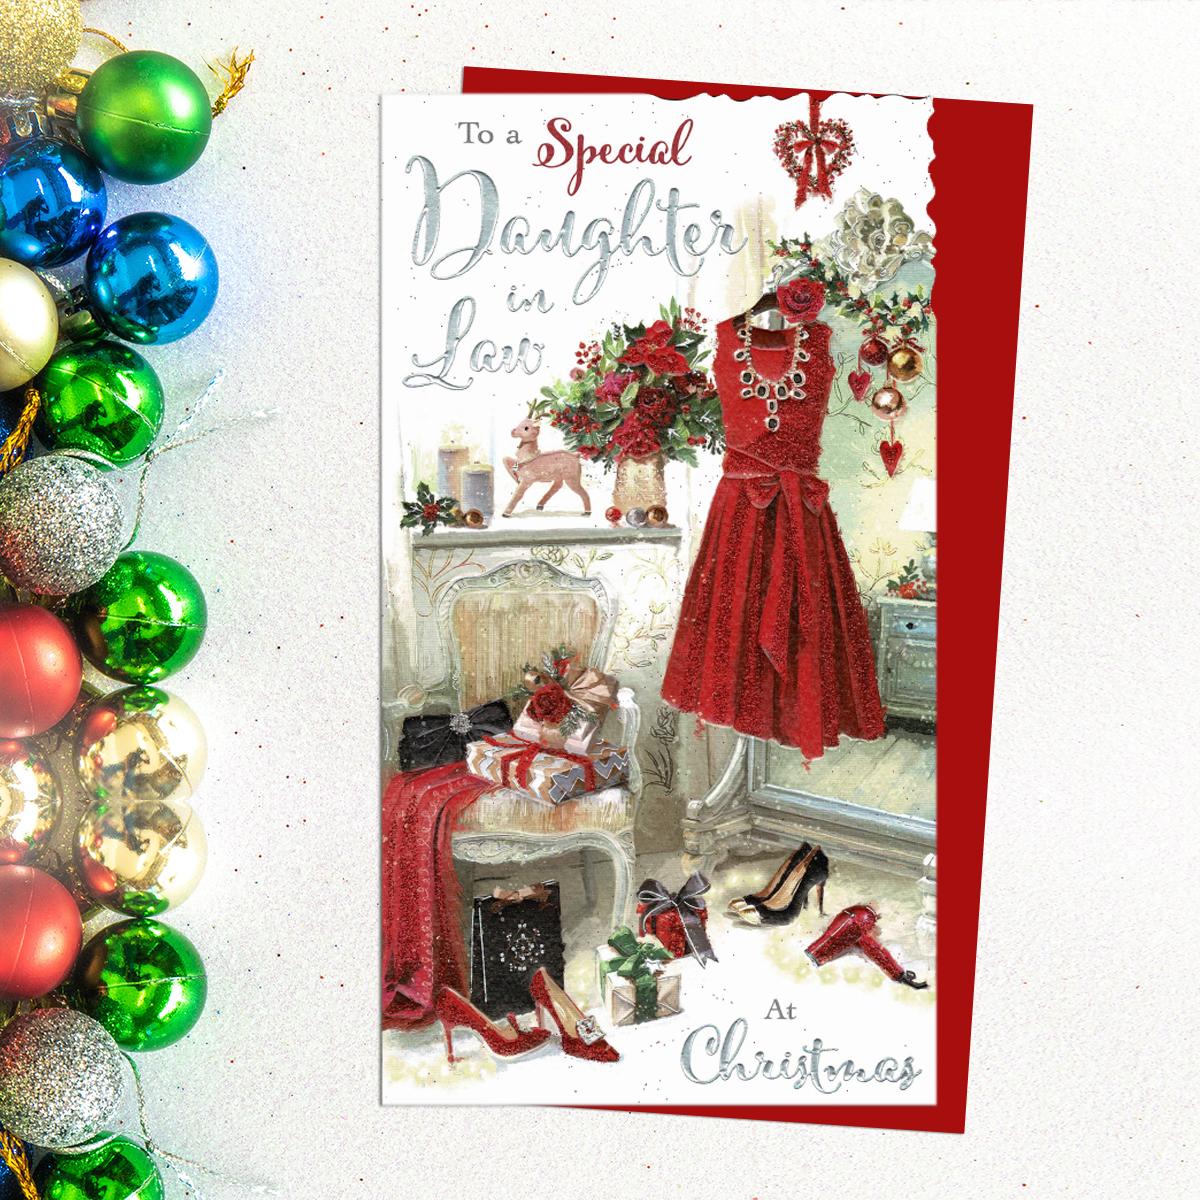 To A Special Daughter In Law At Christmas Dressing Scene With Shoes and Dresses. Red And Silver Lettering And A Red Envelope Complete This Look!